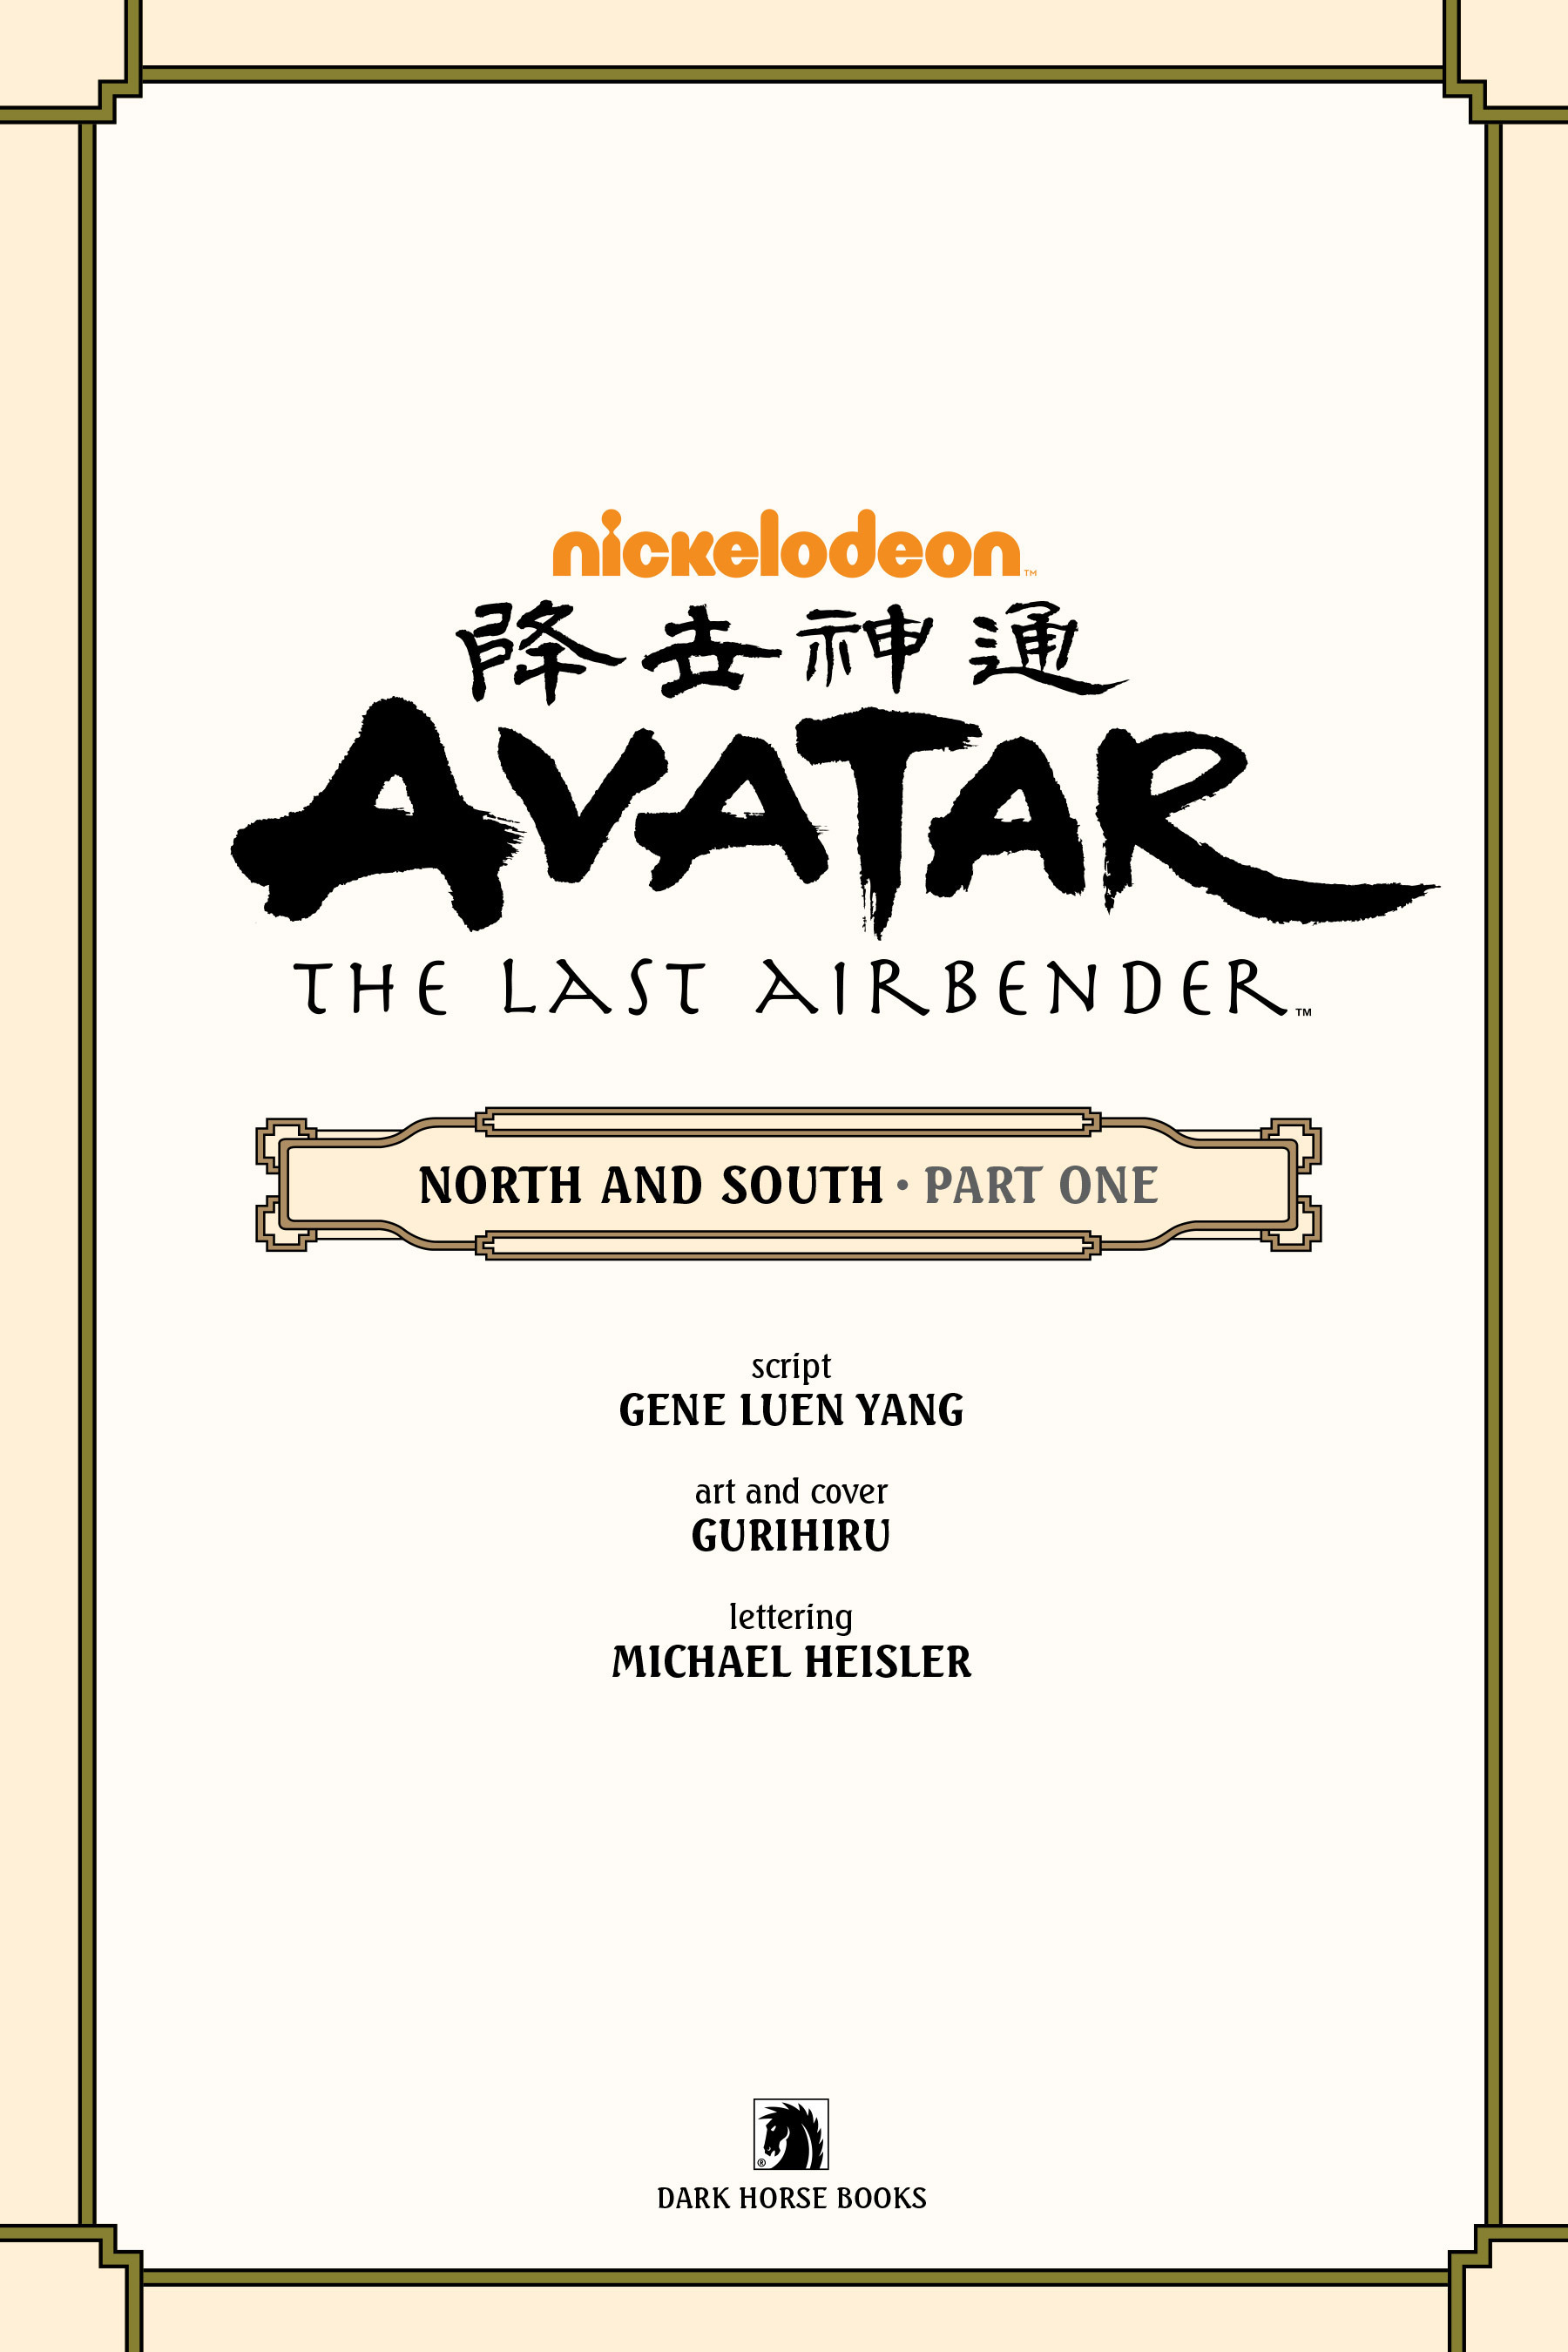 Read online Nickelodeon Avatar: The Last Airbender - North and South comic -  Issue #1 - 5